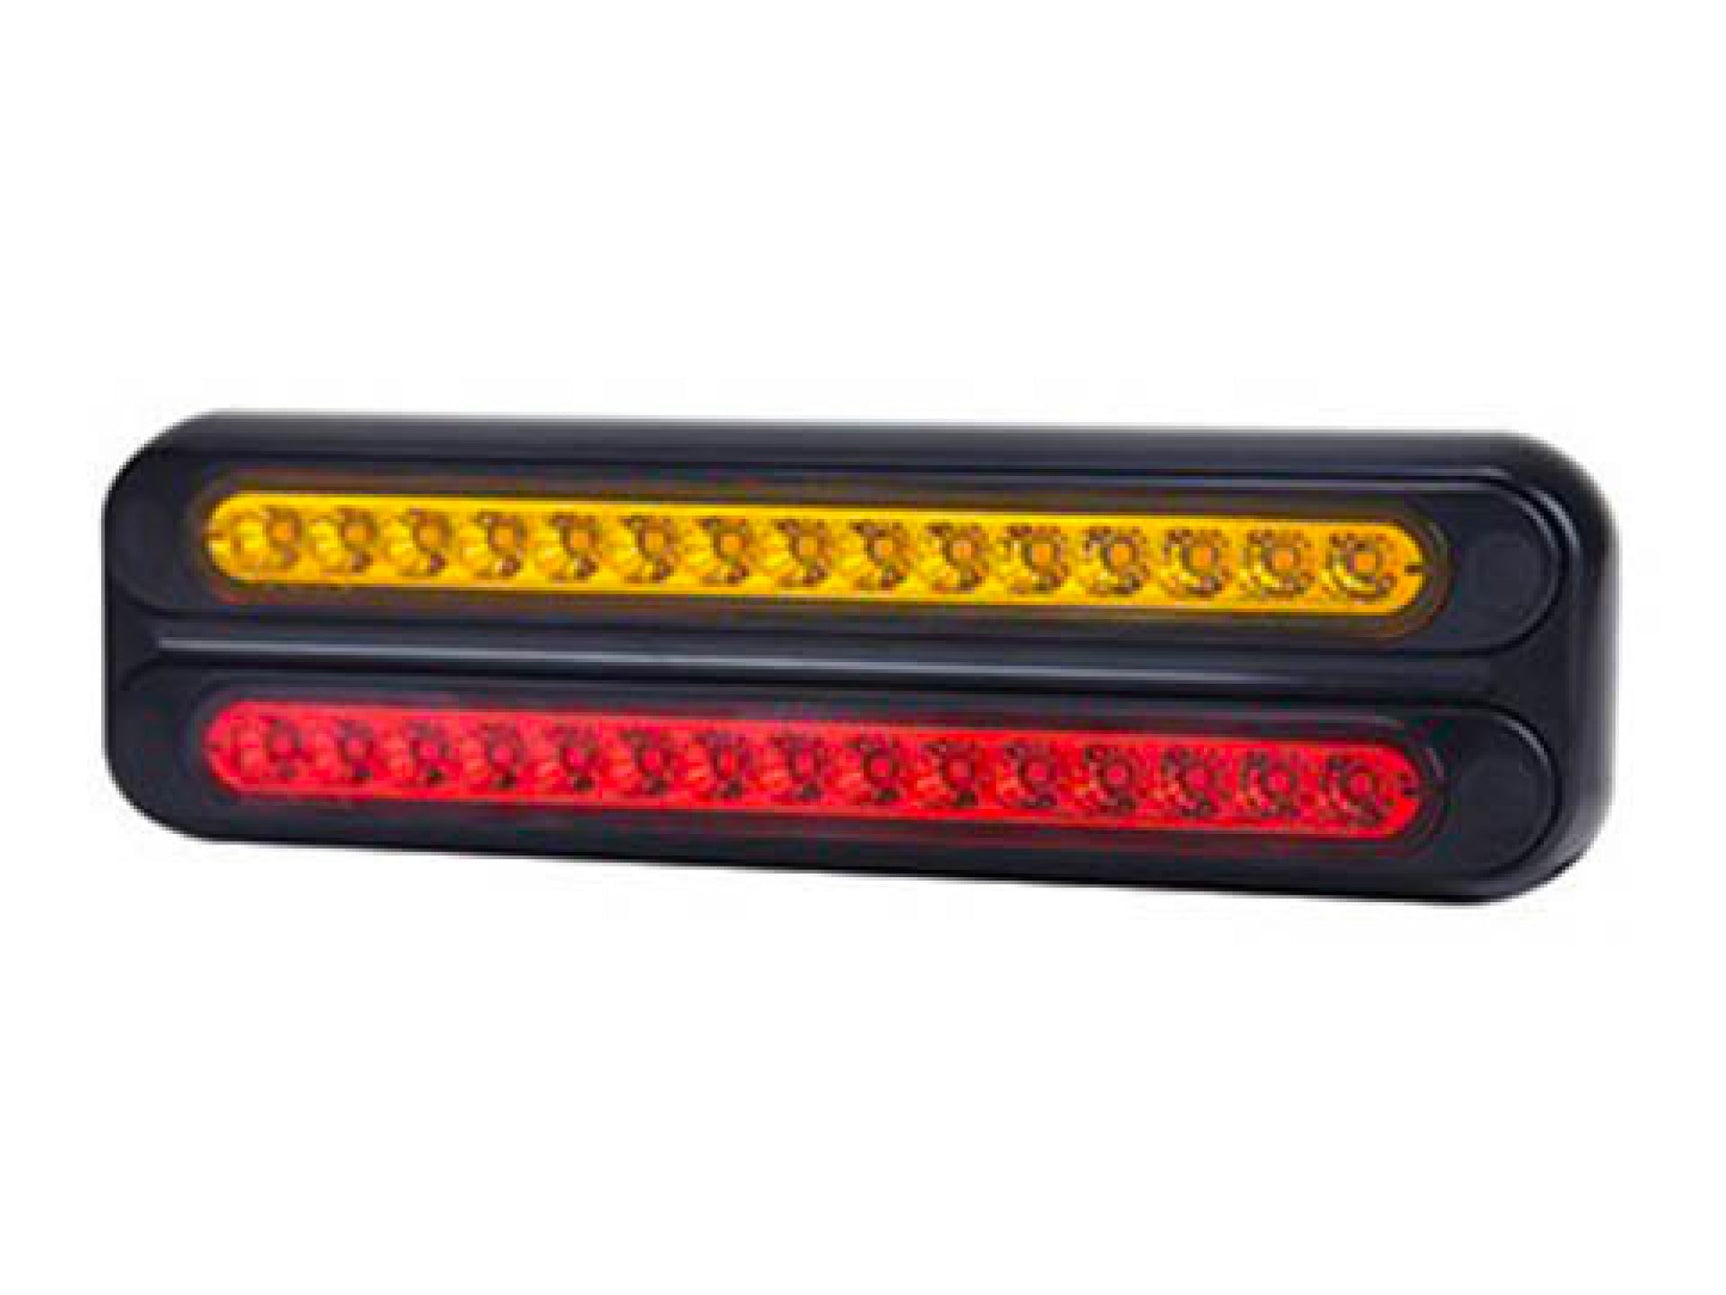 Roadvision LED Rear Combination Lamp BR70 Series 10-30v Stop/Tail/Indicator 266mm x 78mm x 26mm Twin Stud Mount